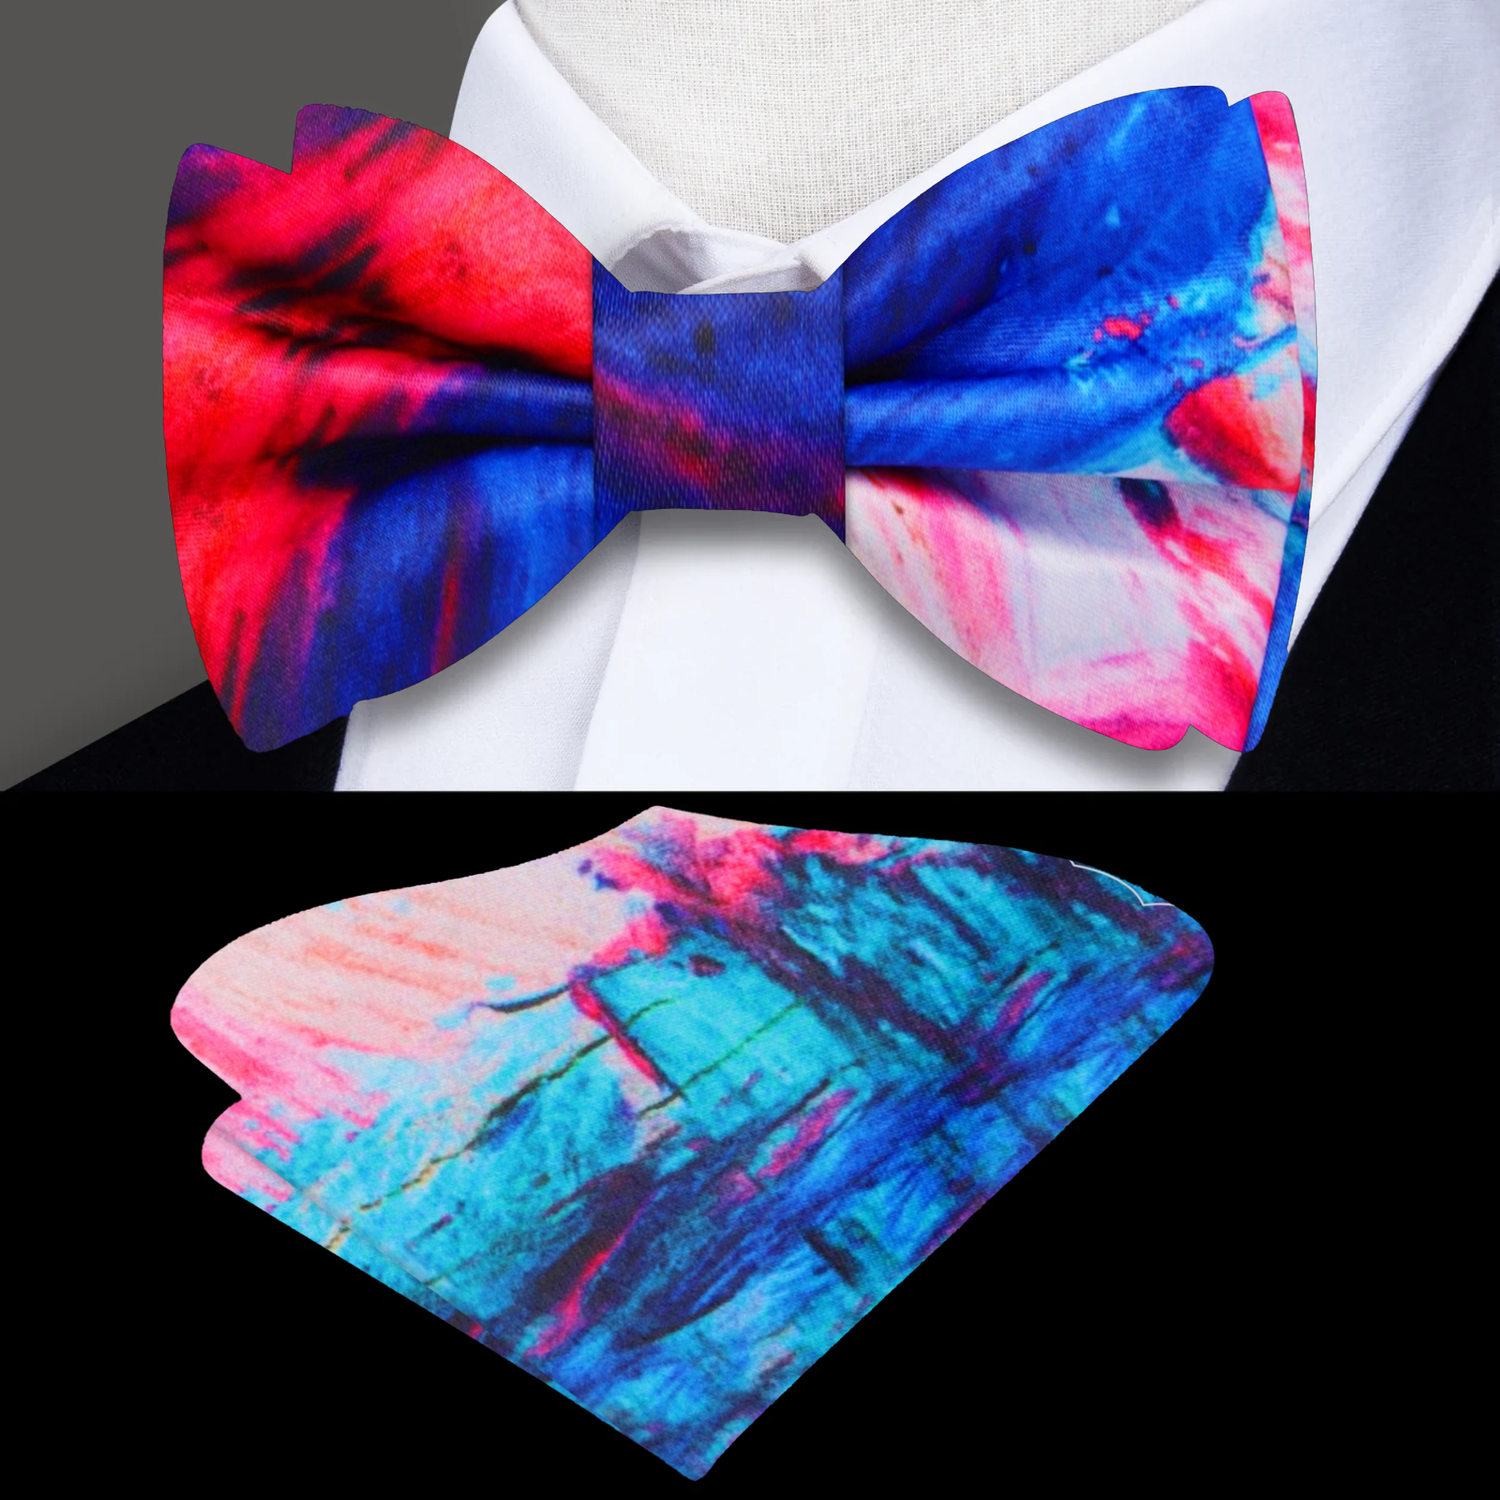 Red, Blue, Pink Abstract Bow Tie and Pocket Square||Red, Blue, Pink